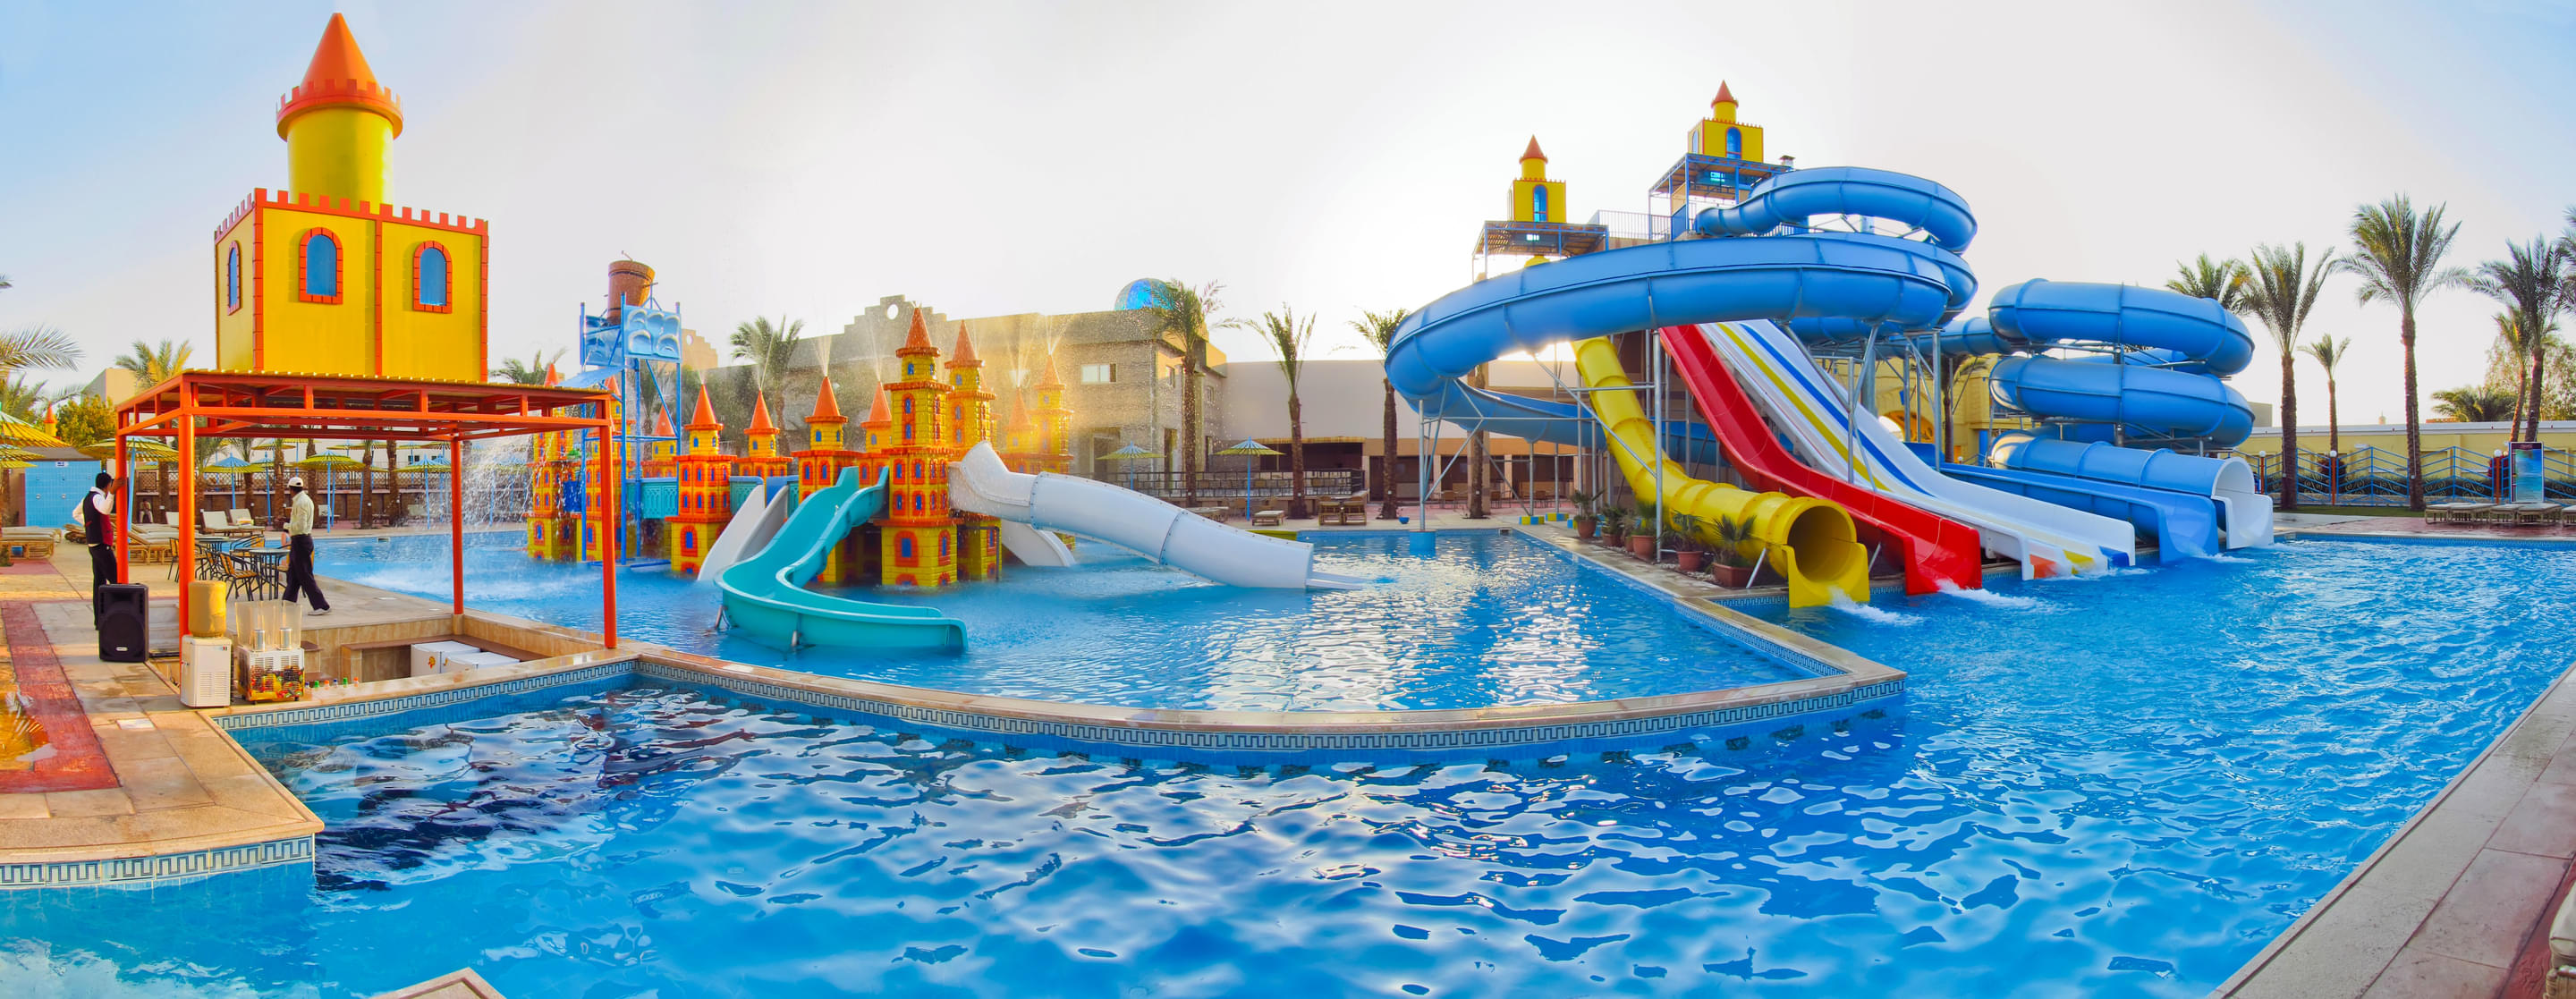 Best Water Parks in Malaysia